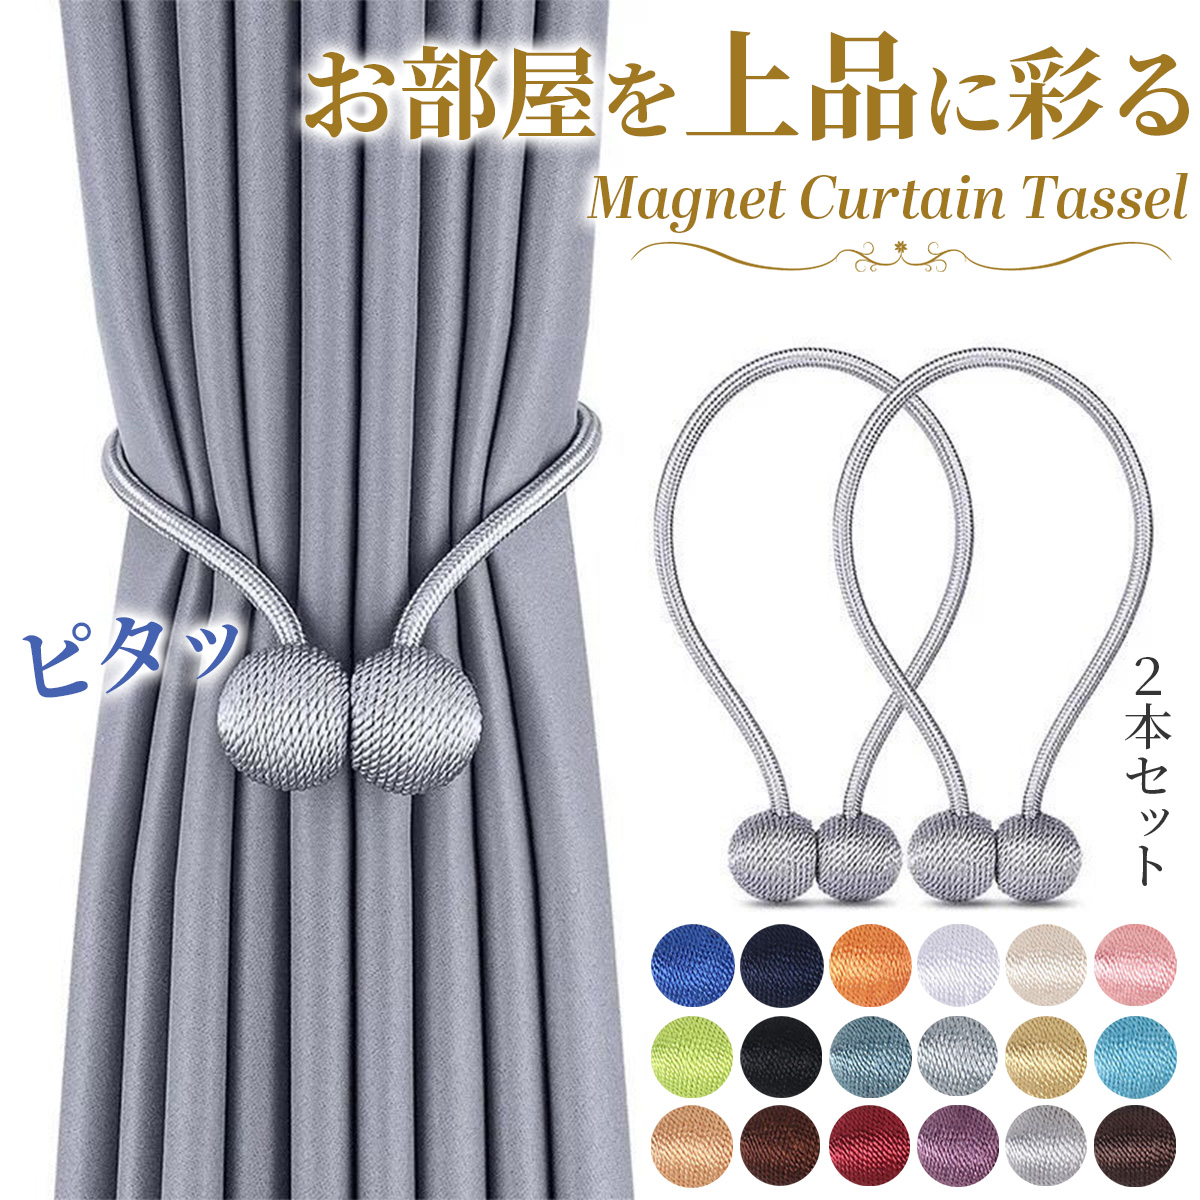  curtain tassel 2 piece set magnet magnet catch Northern Europe manner powerful magnet clip lovely simple cord 